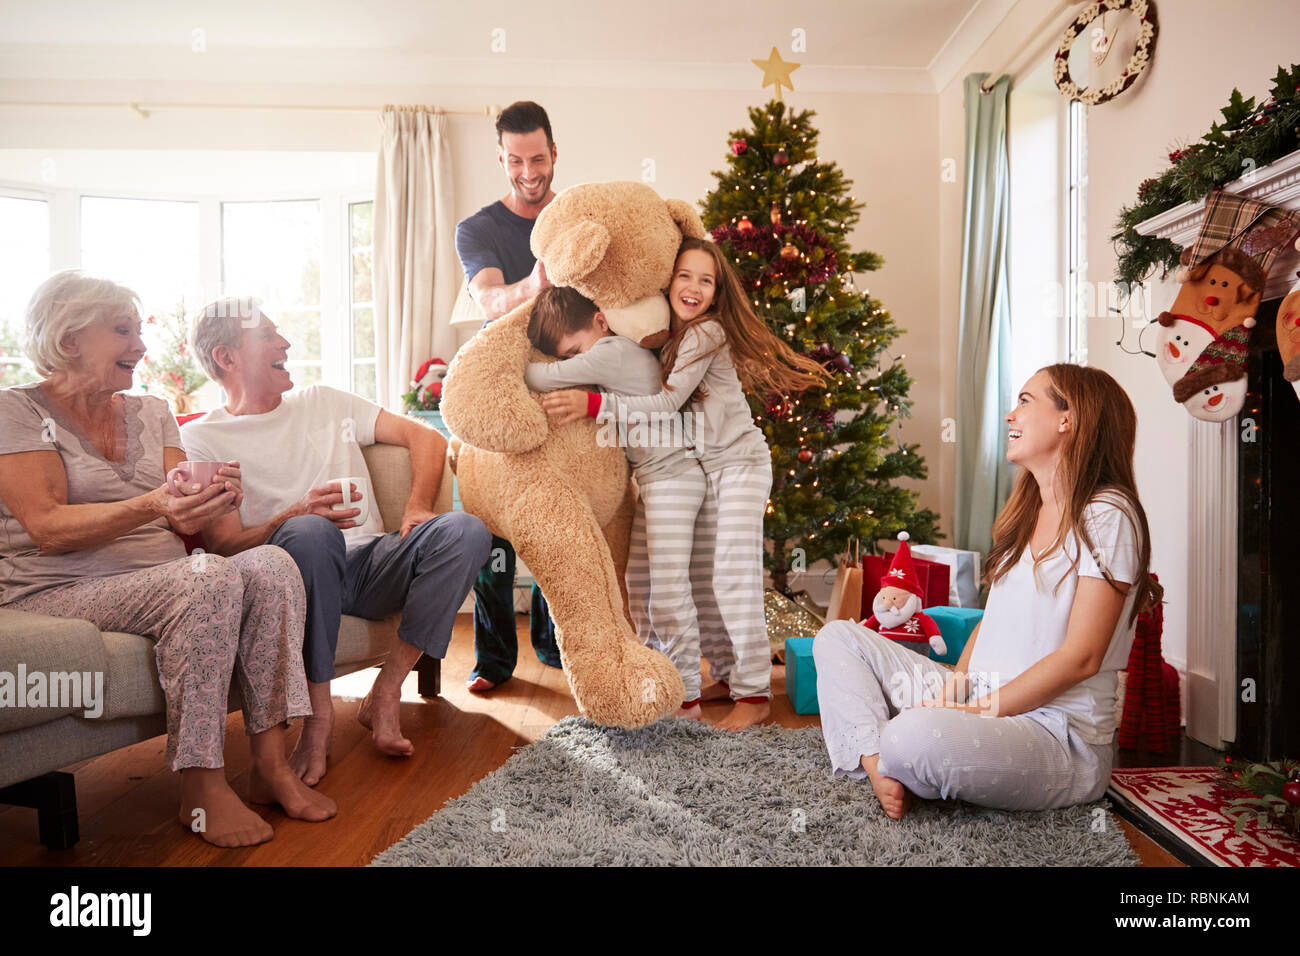 Children Playing With Giant Teddy Bear As Multi-Generation Family Open Gifts On Christmas Day Stock Photo